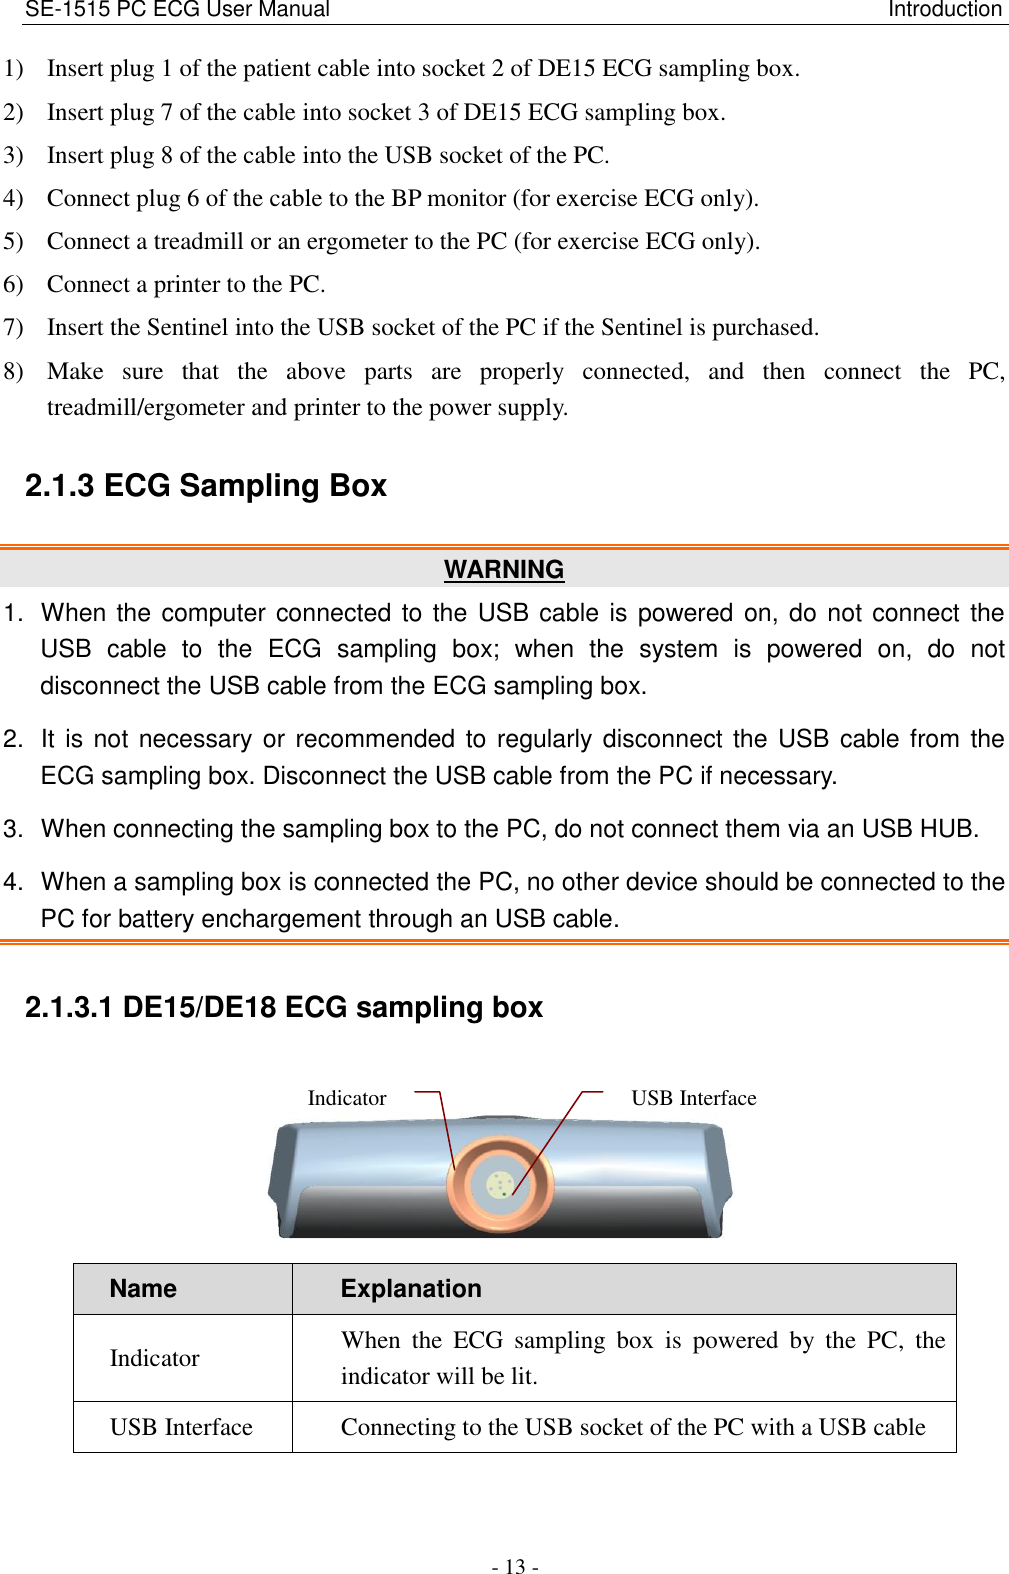 SE-1515 PC ECG User Manual                                                                                                   Introduction - 13 - 1) Insert plug 1 of the patient cable into socket 2 of DE15 ECG sampling box. 2) Insert plug 7 of the cable into socket 3 of DE15 ECG sampling box. 3) Insert plug 8 of the cable into the USB socket of the PC. 4) Connect plug 6 of the cable to the BP monitor (for exercise ECG only). 5) Connect a treadmill or an ergometer to the PC (for exercise ECG only). 6) Connect a printer to the PC. 7) Insert the Sentinel into the USB socket of the PC if the Sentinel is purchased. 8) Make  sure  that  the  above  parts  are  properly  connected,  and  then  connect  the  PC, treadmill/ergometer and printer to the power supply. 2.1.3 ECG Sampling Box WARNING 1.  When the computer connected to the USB cable is powered on, do not connect the USB  cable  to  the  ECG  sampling  box;  when  the  system  is  powered  on,  do  not disconnect the USB cable from the ECG sampling box. 2.  It  is not necessary or recommended to regularly disconnect  the USB  cable from the ECG sampling box. Disconnect the USB cable from the PC if necessary. 3.  When connecting the sampling box to the PC, do not connect them via an USB HUB. 4.  When a sampling box is connected the PC, no other device should be connected to the PC for battery enchargement through an USB cable. 2.1.3.1 DE15/DE18 ECG sampling box  Name Explanation Indicator When  the  ECG  sampling  box  is  powered  by  the  PC,  the indicator will be lit. USB Interface Connecting to the USB socket of the PC with a USB cable  USB Interface Indicator 